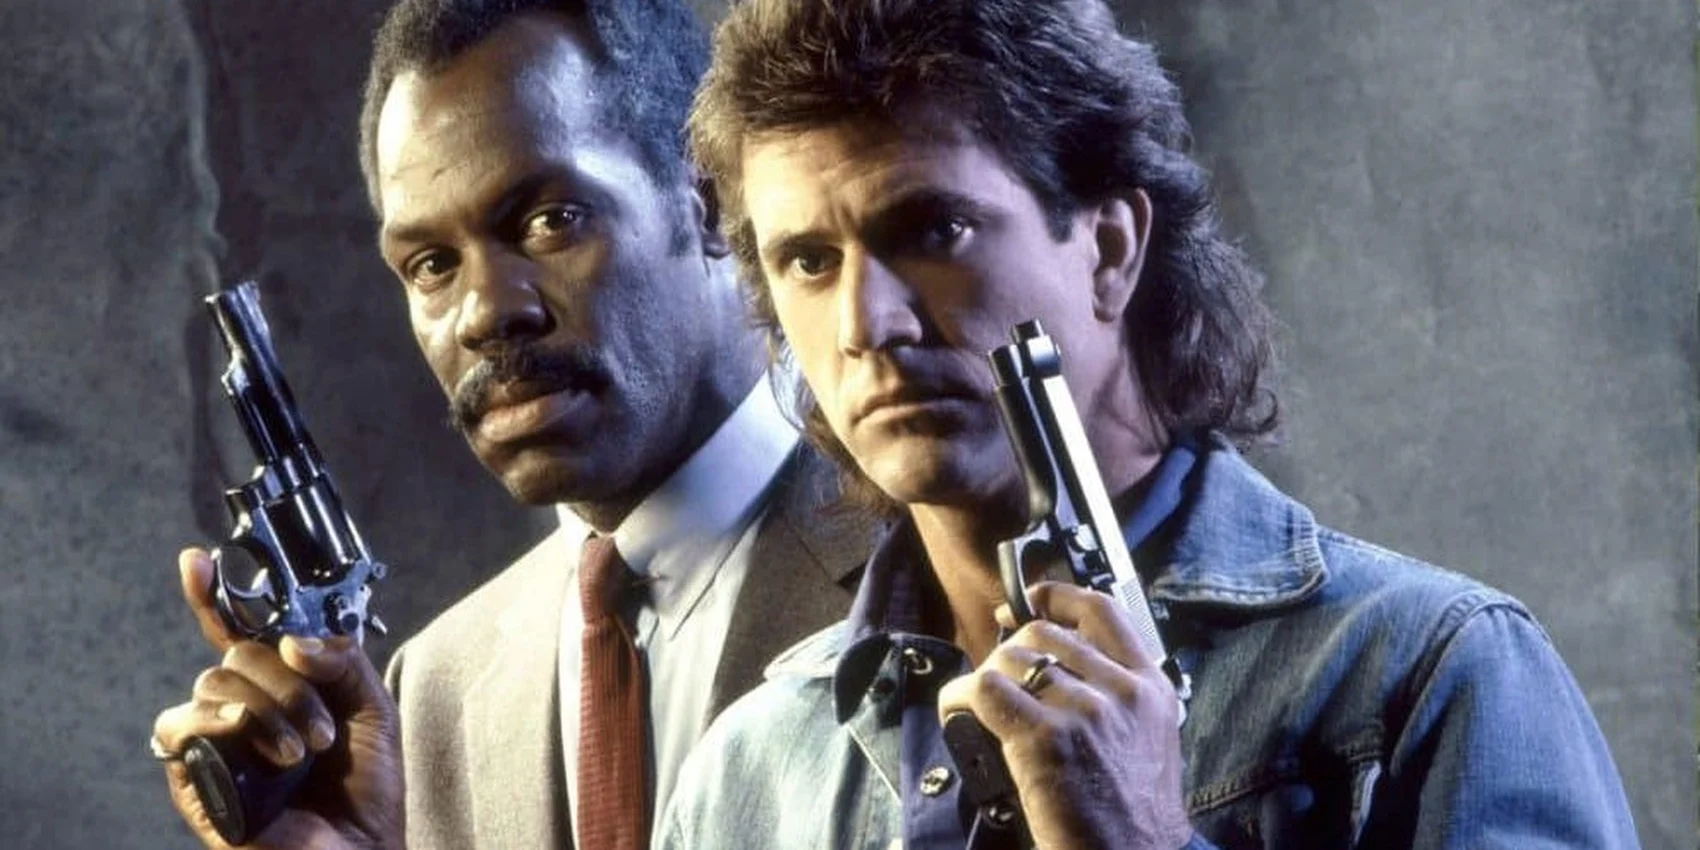 ‘Lethal Weapon 5’ Has Been Confirmed With Original Cast & Director